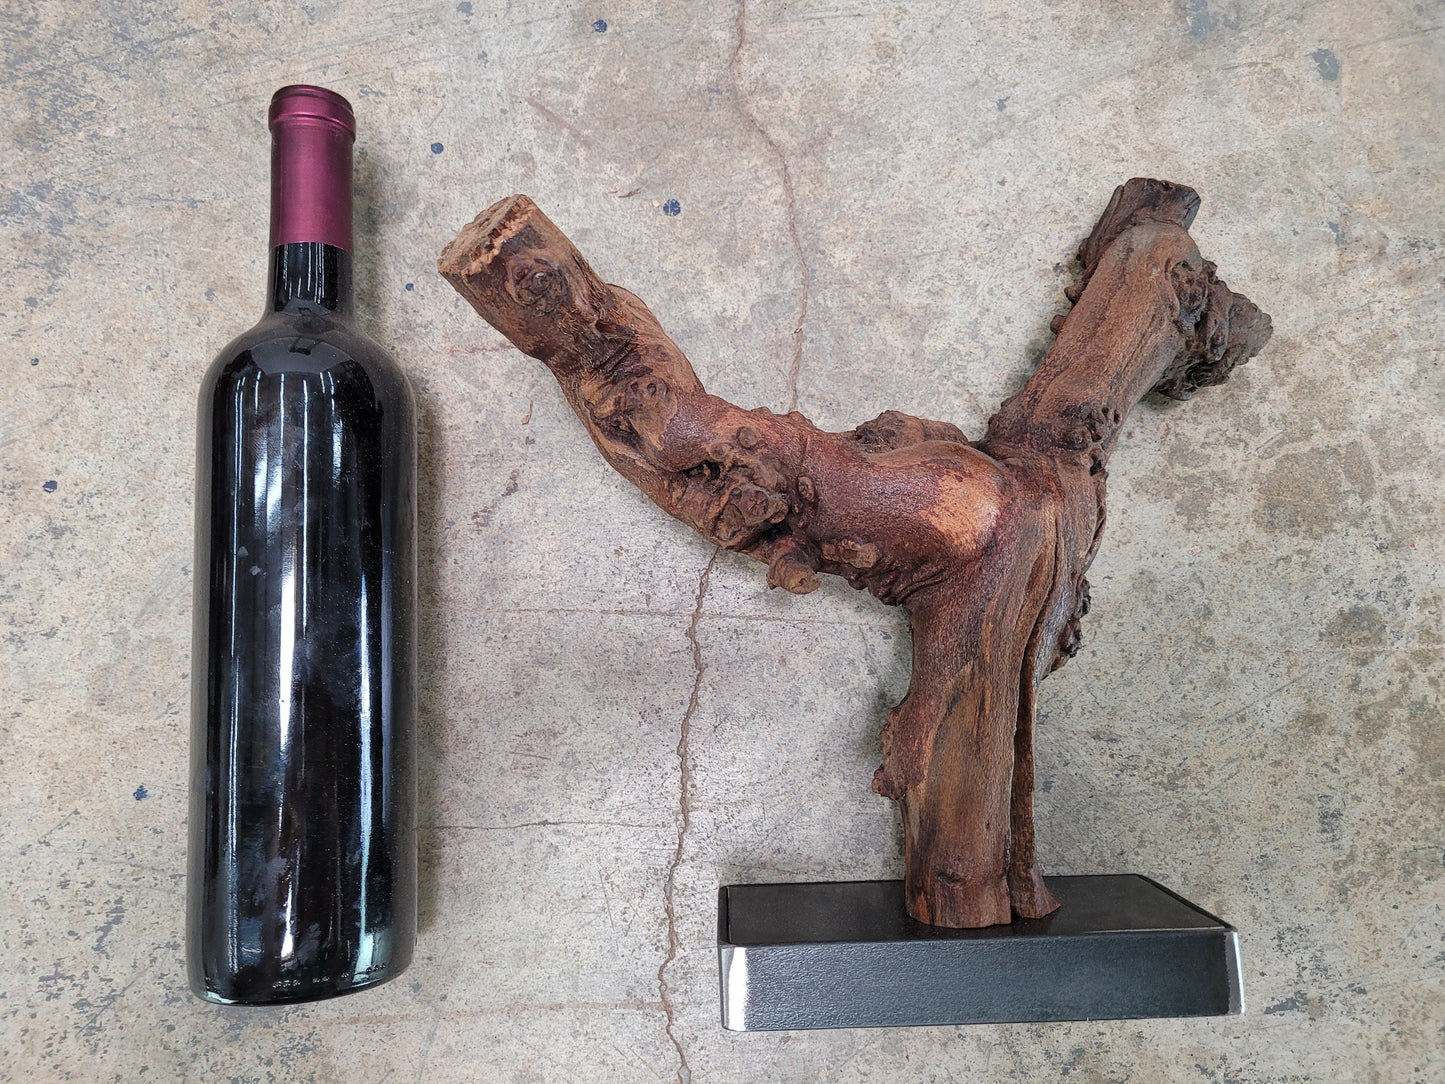 RARE Grape Vine Art From Opus 1 0603 made from retired Napa Cabernet grapevine. 100% Reclaimed!